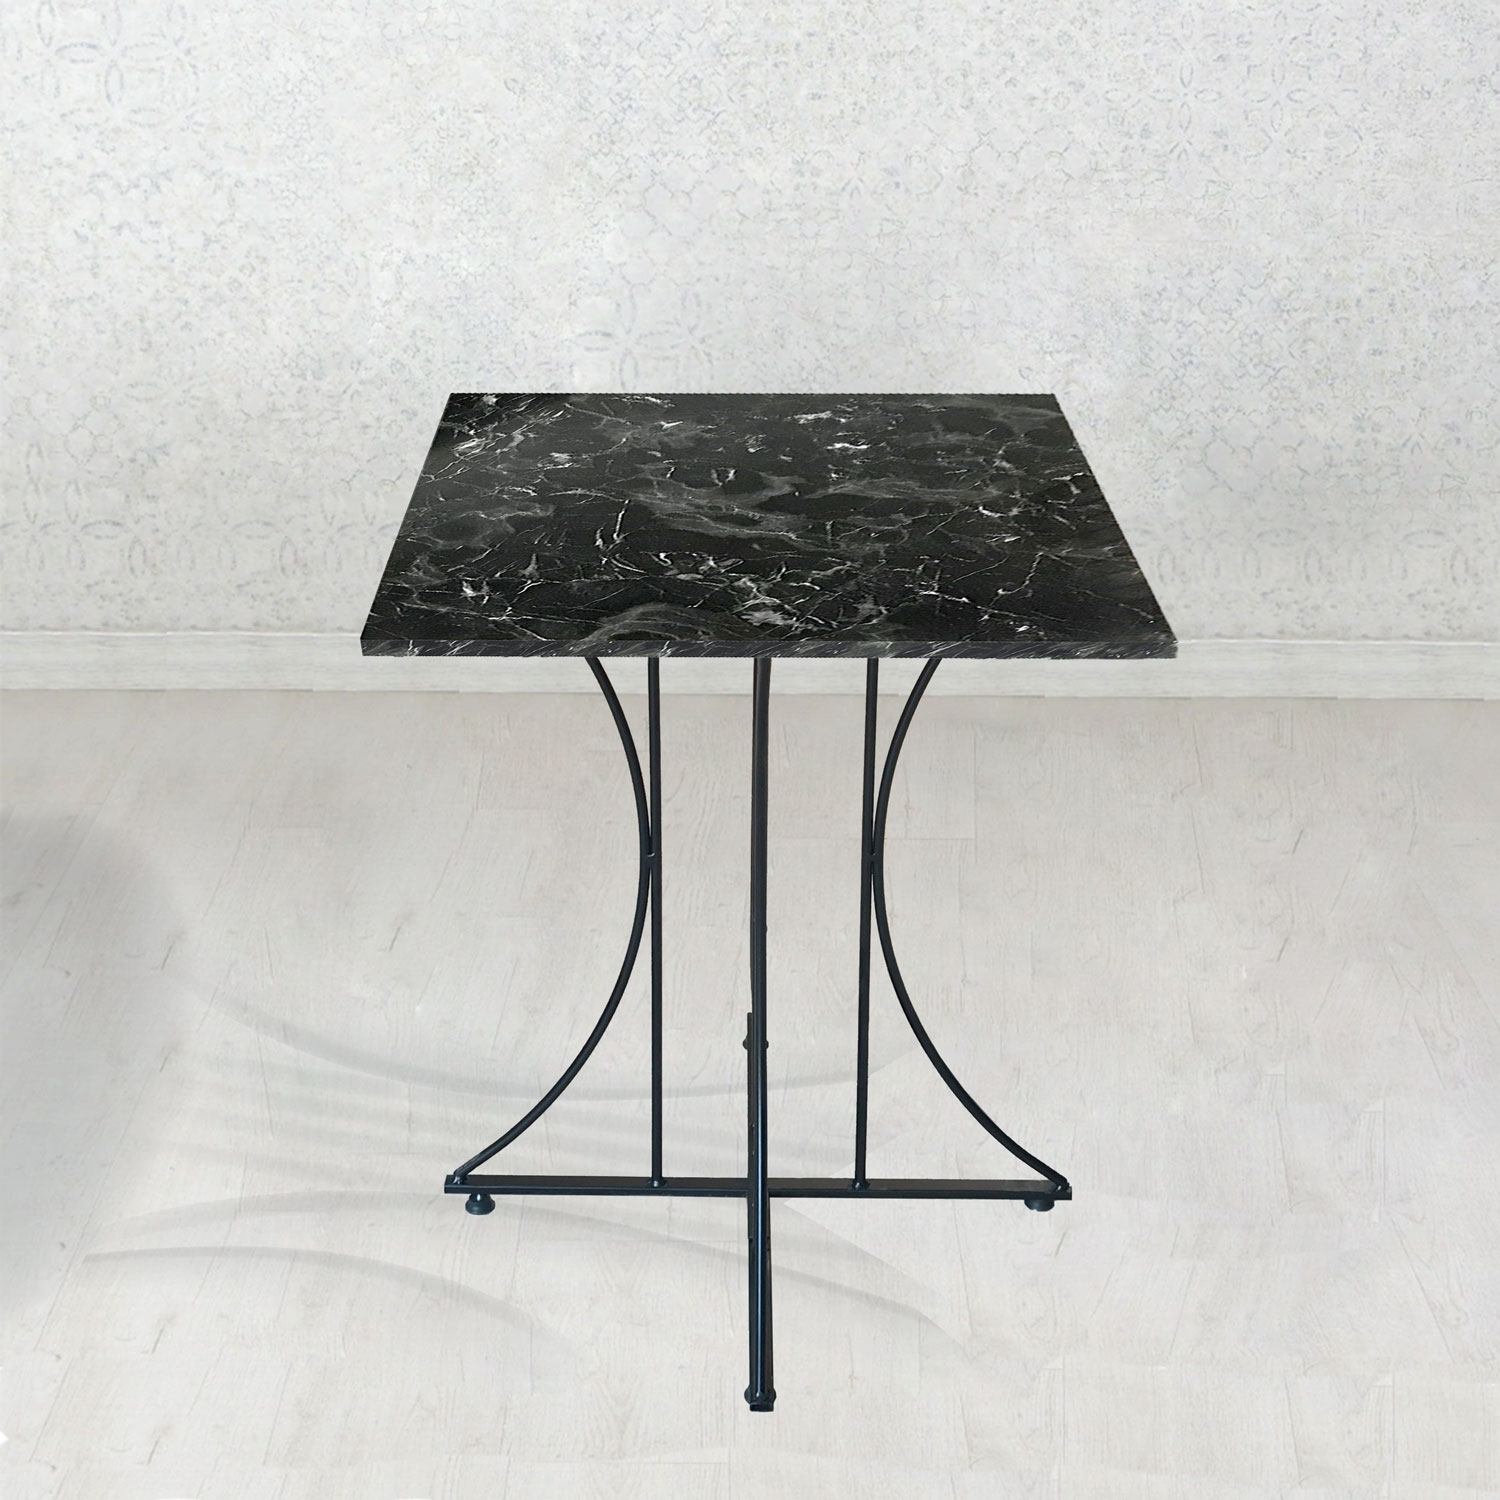 2 Person 60X60 Table Set Marble Pattern + 2 Pieces Combed Black